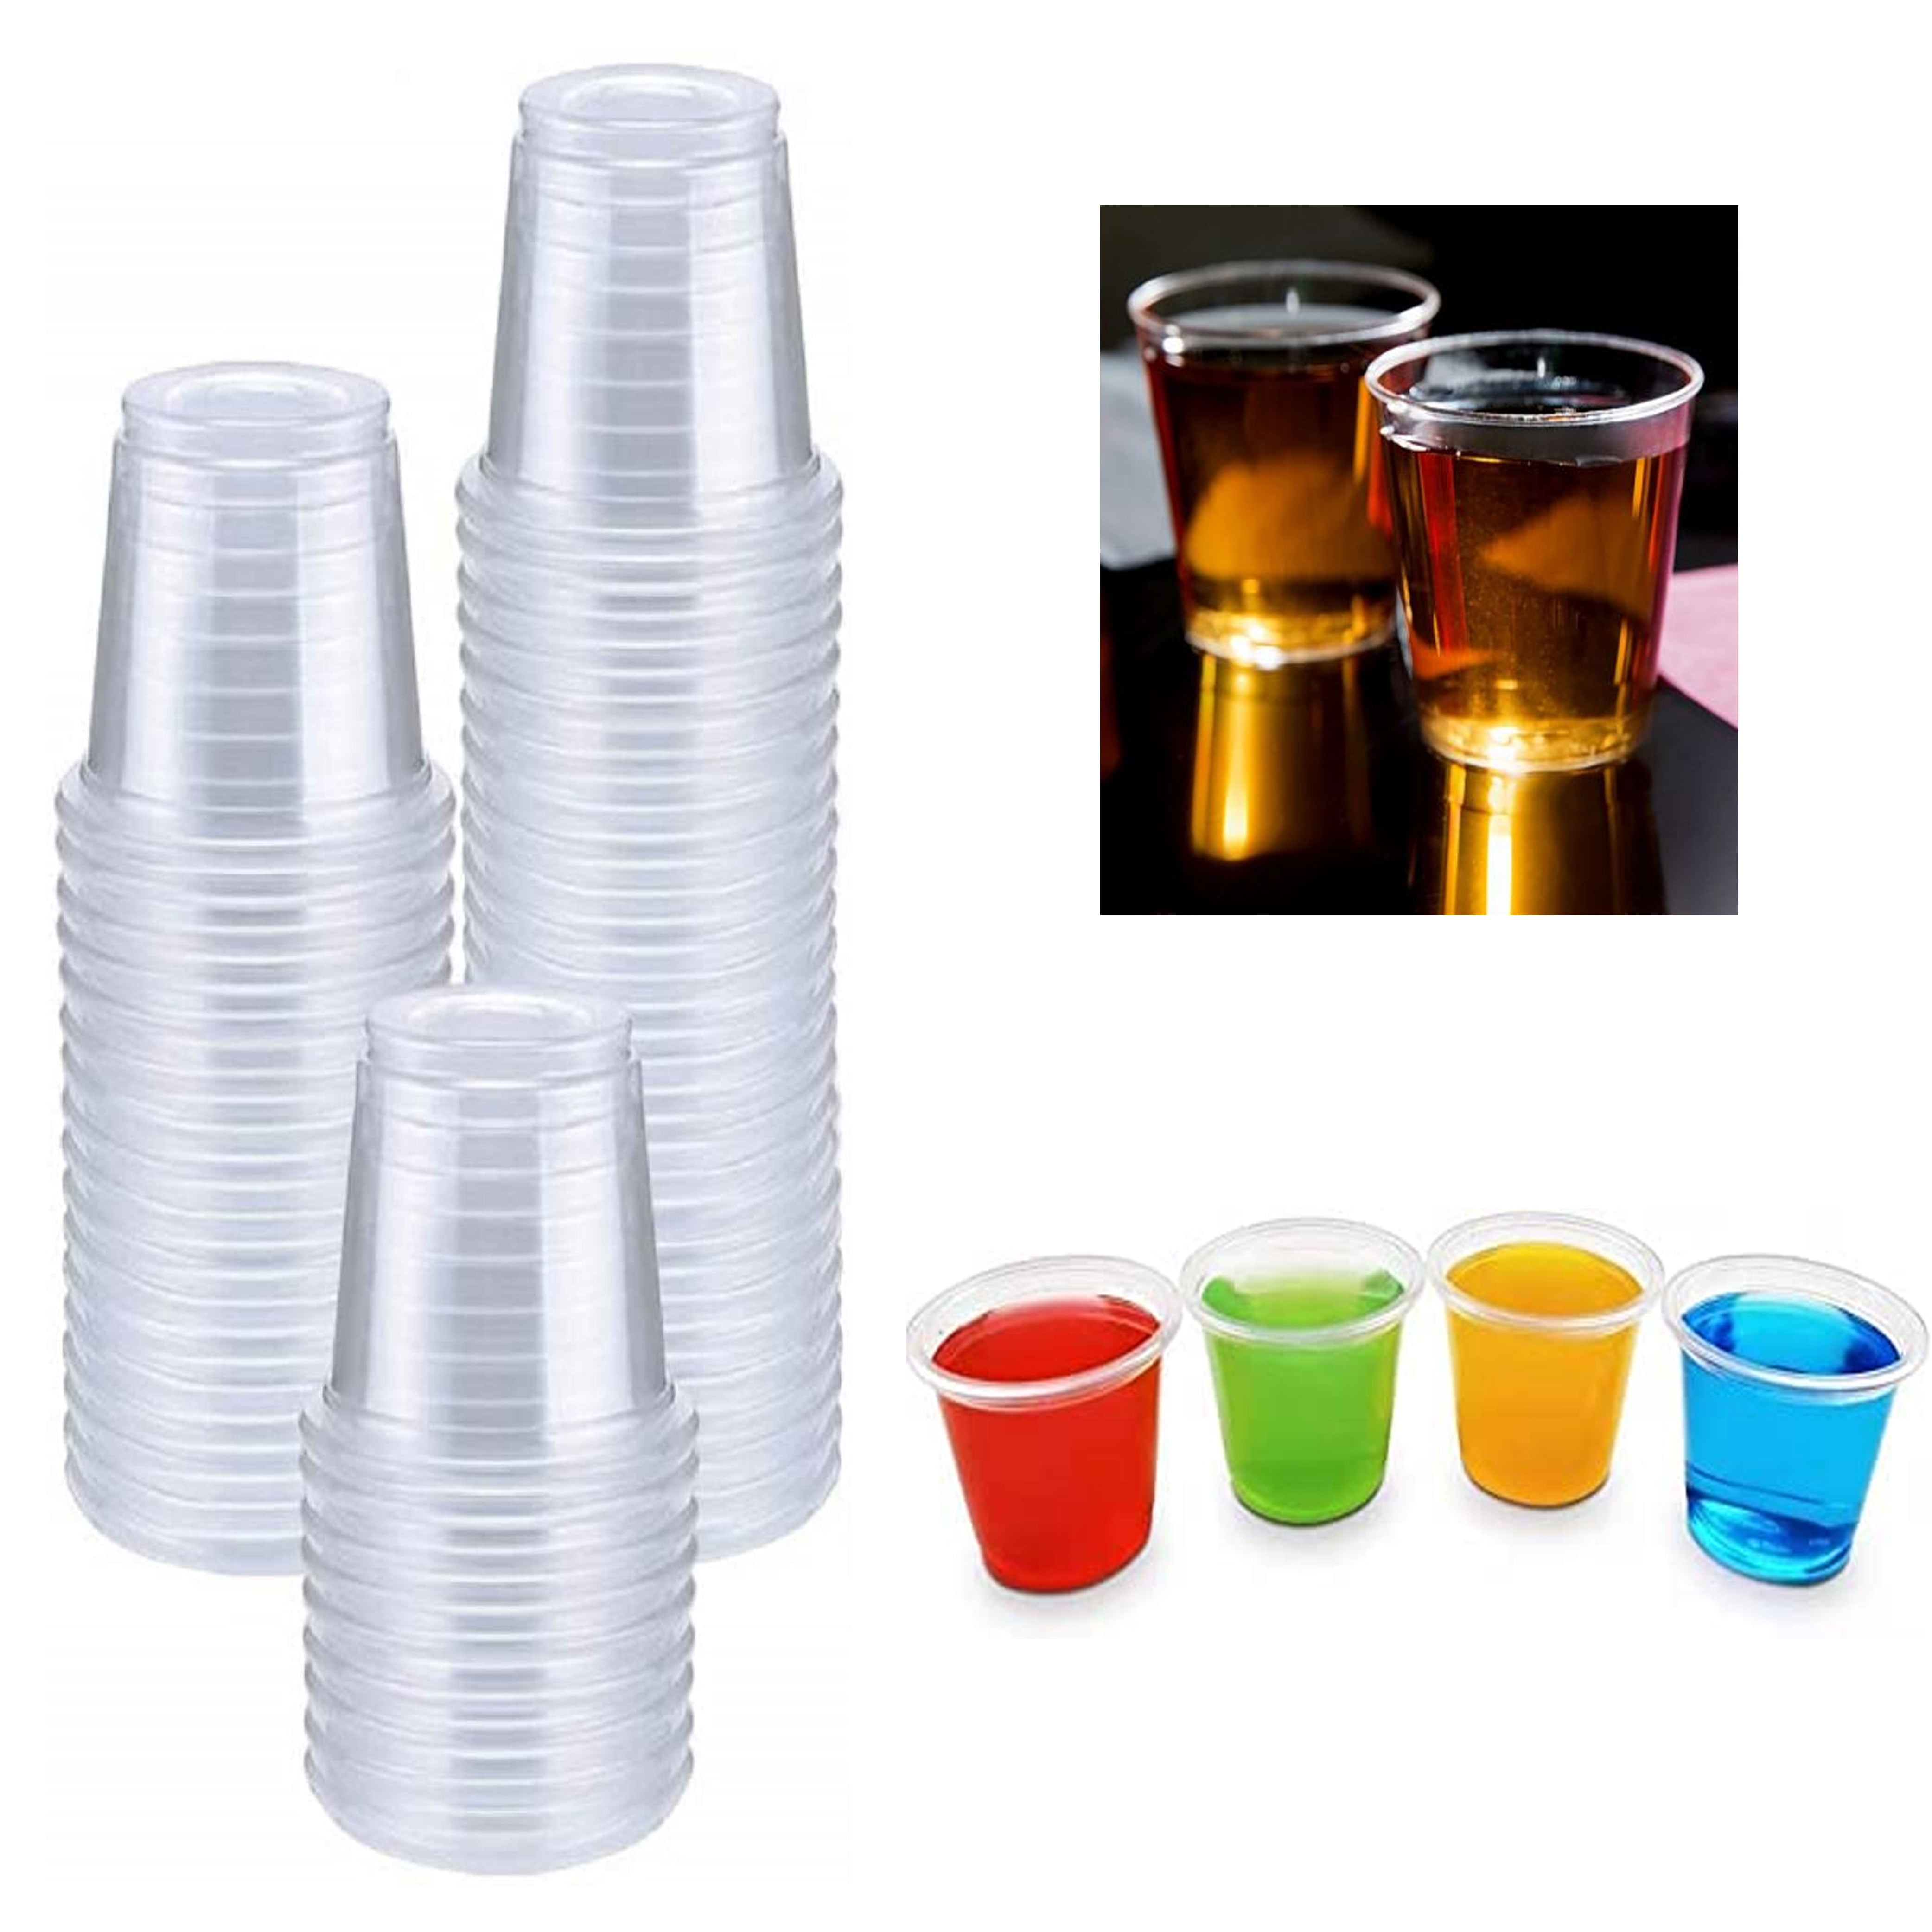 100 Clear Shot Glasses 2 oz Hard Plastic Disposable Cups Wine Party Catering Bar 